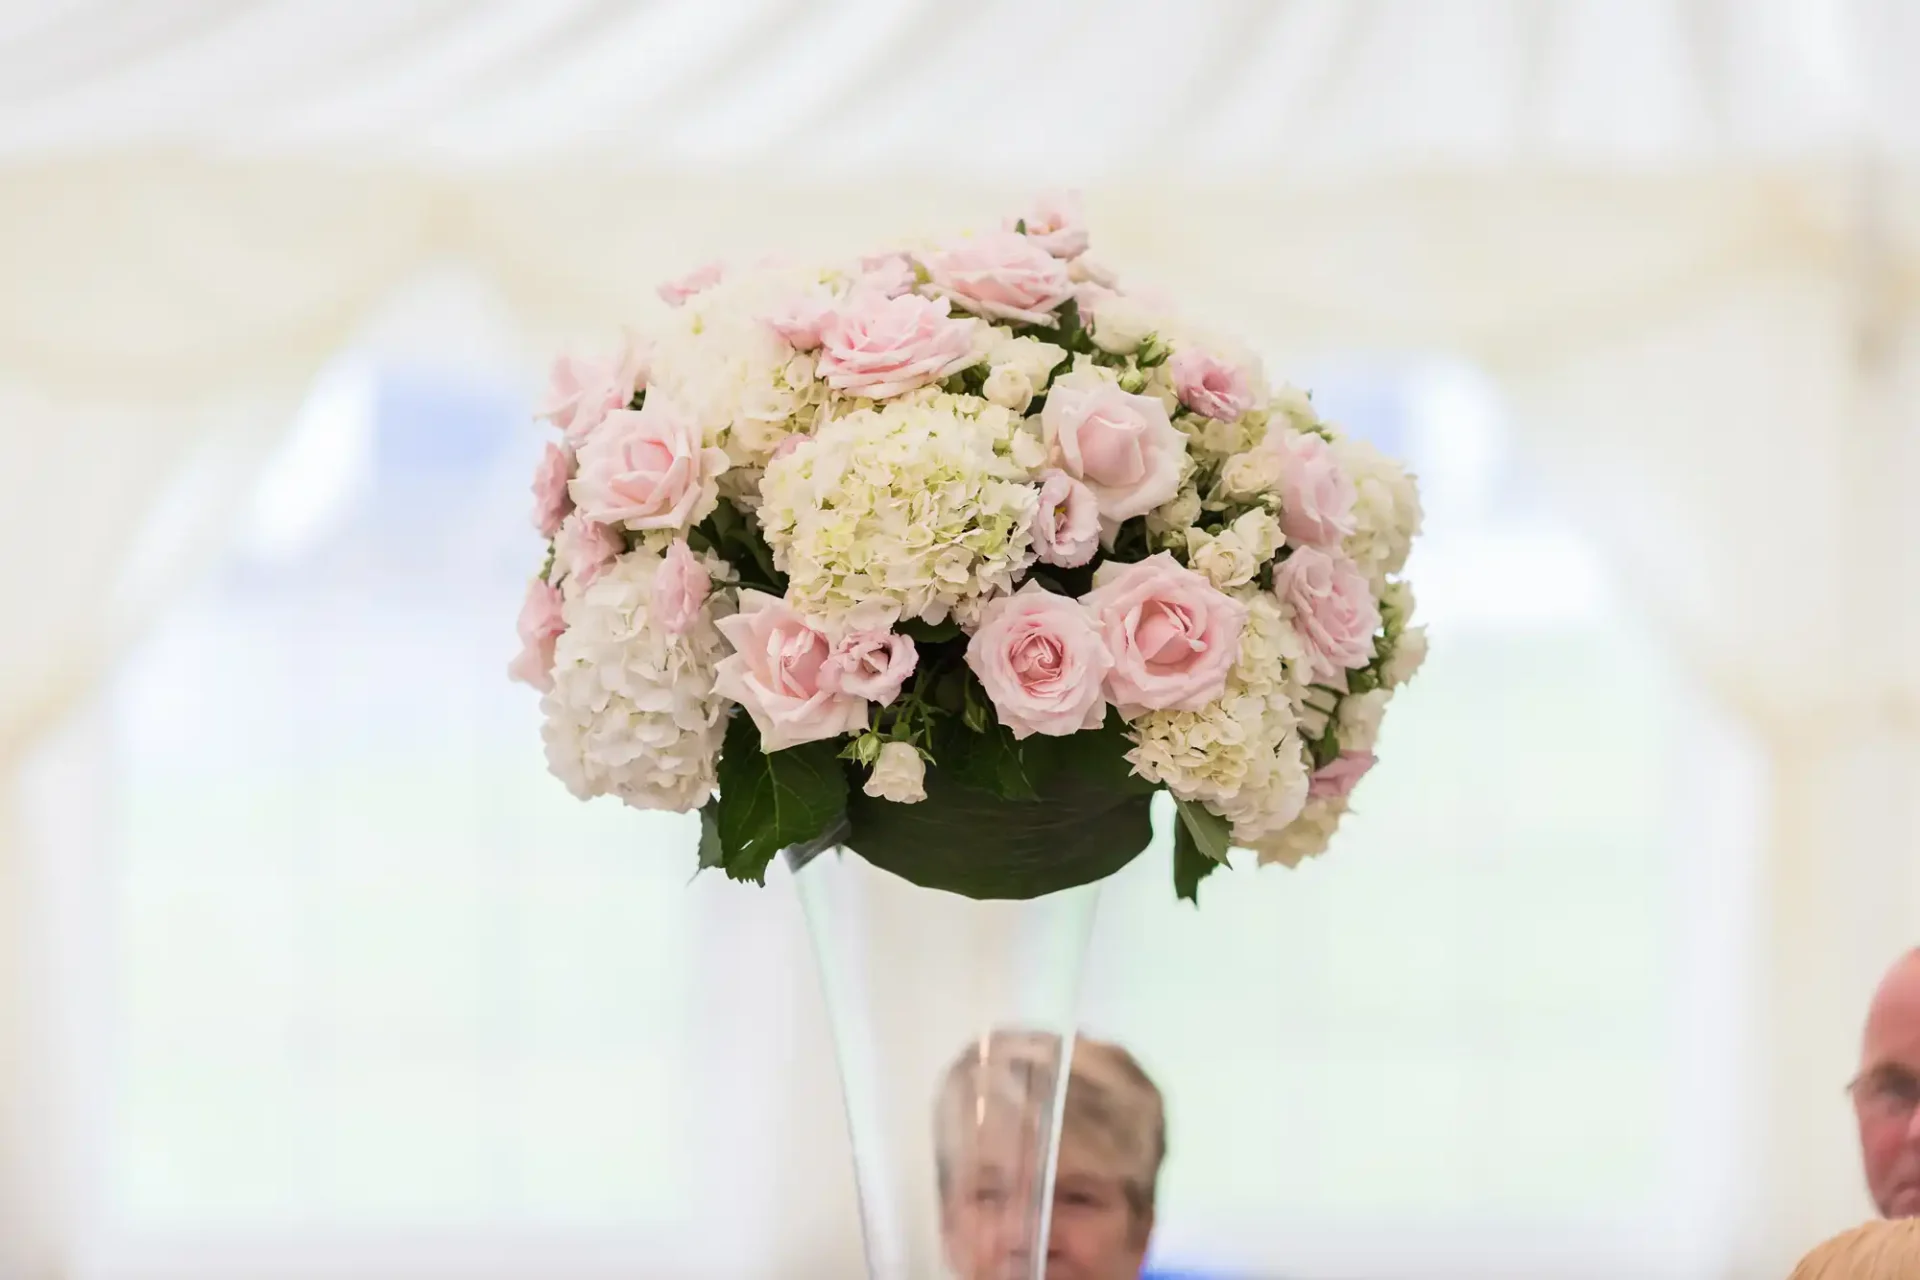 A bouquet of pink roses and white hydrangeas in a vase on a table, with people blurred in the background under a white tent.